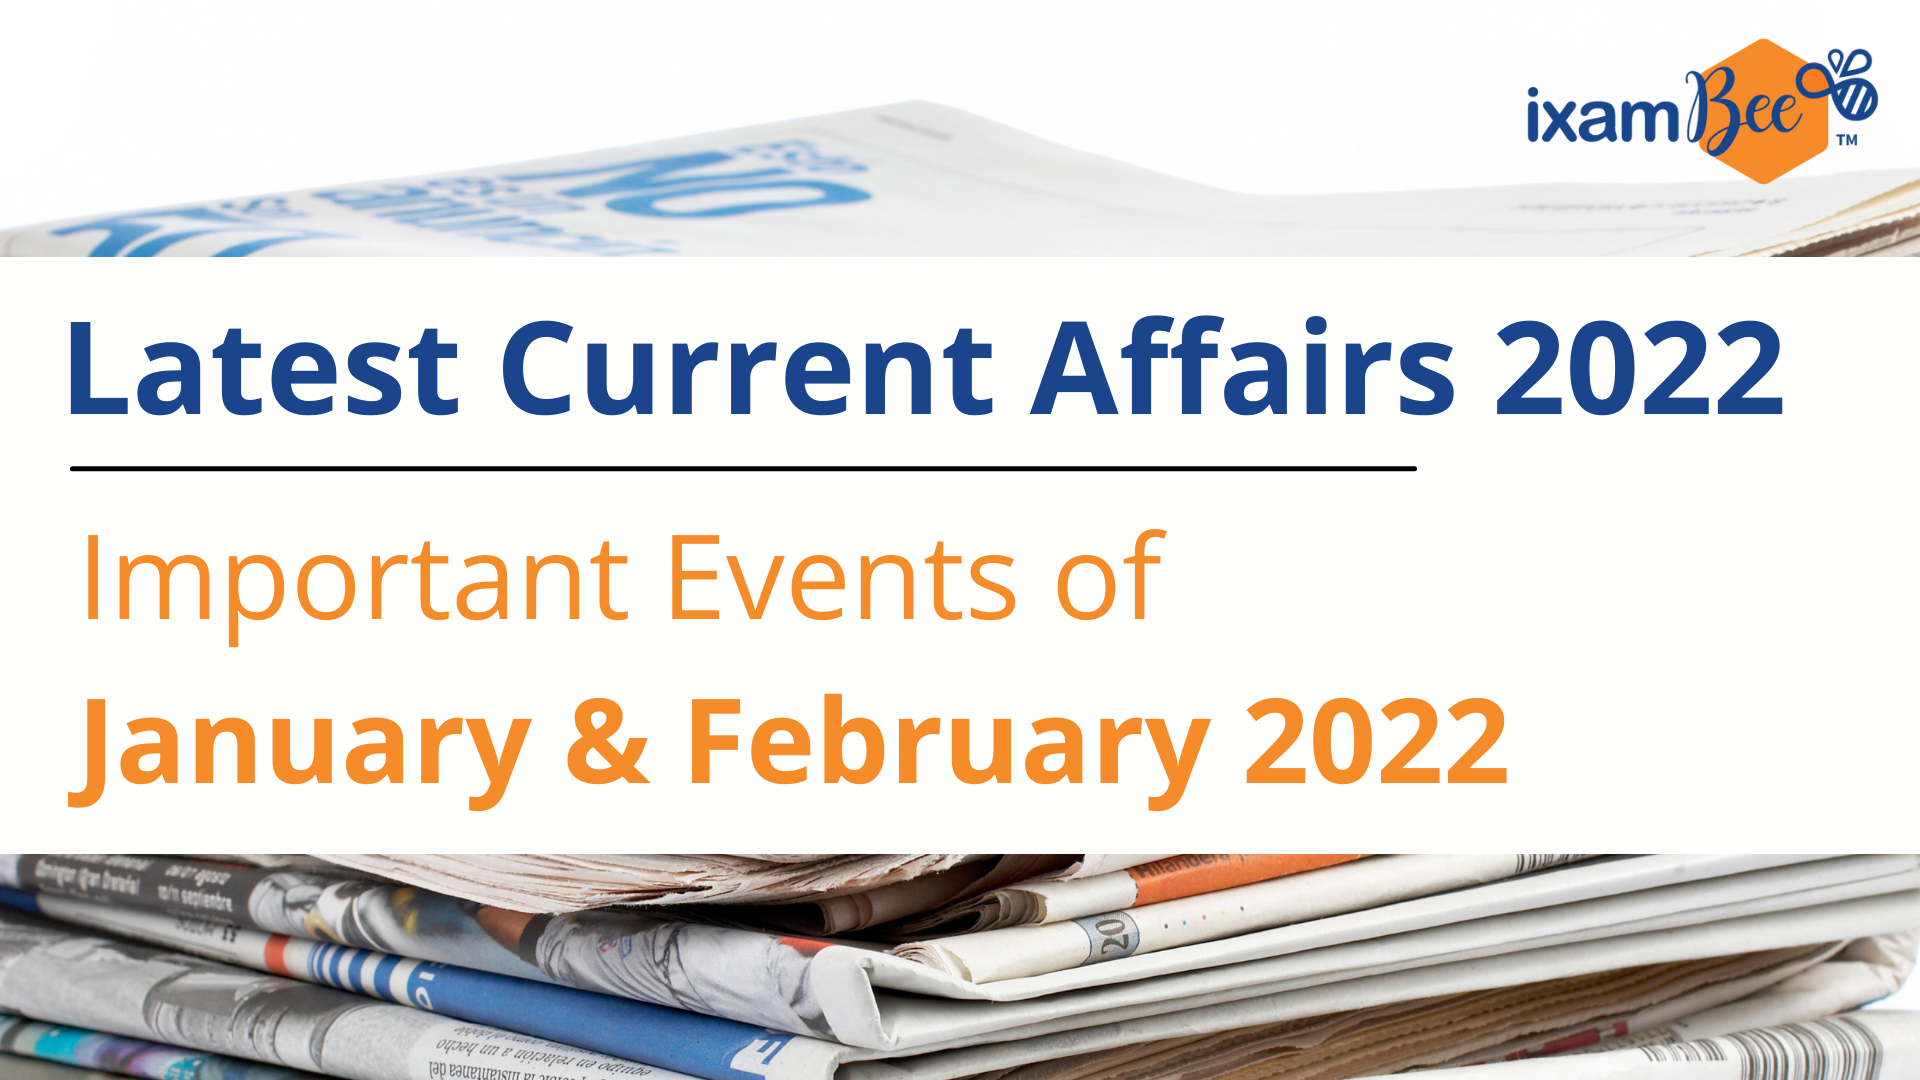 Latest Current Affairs 2022: Important Events of January & February 2022